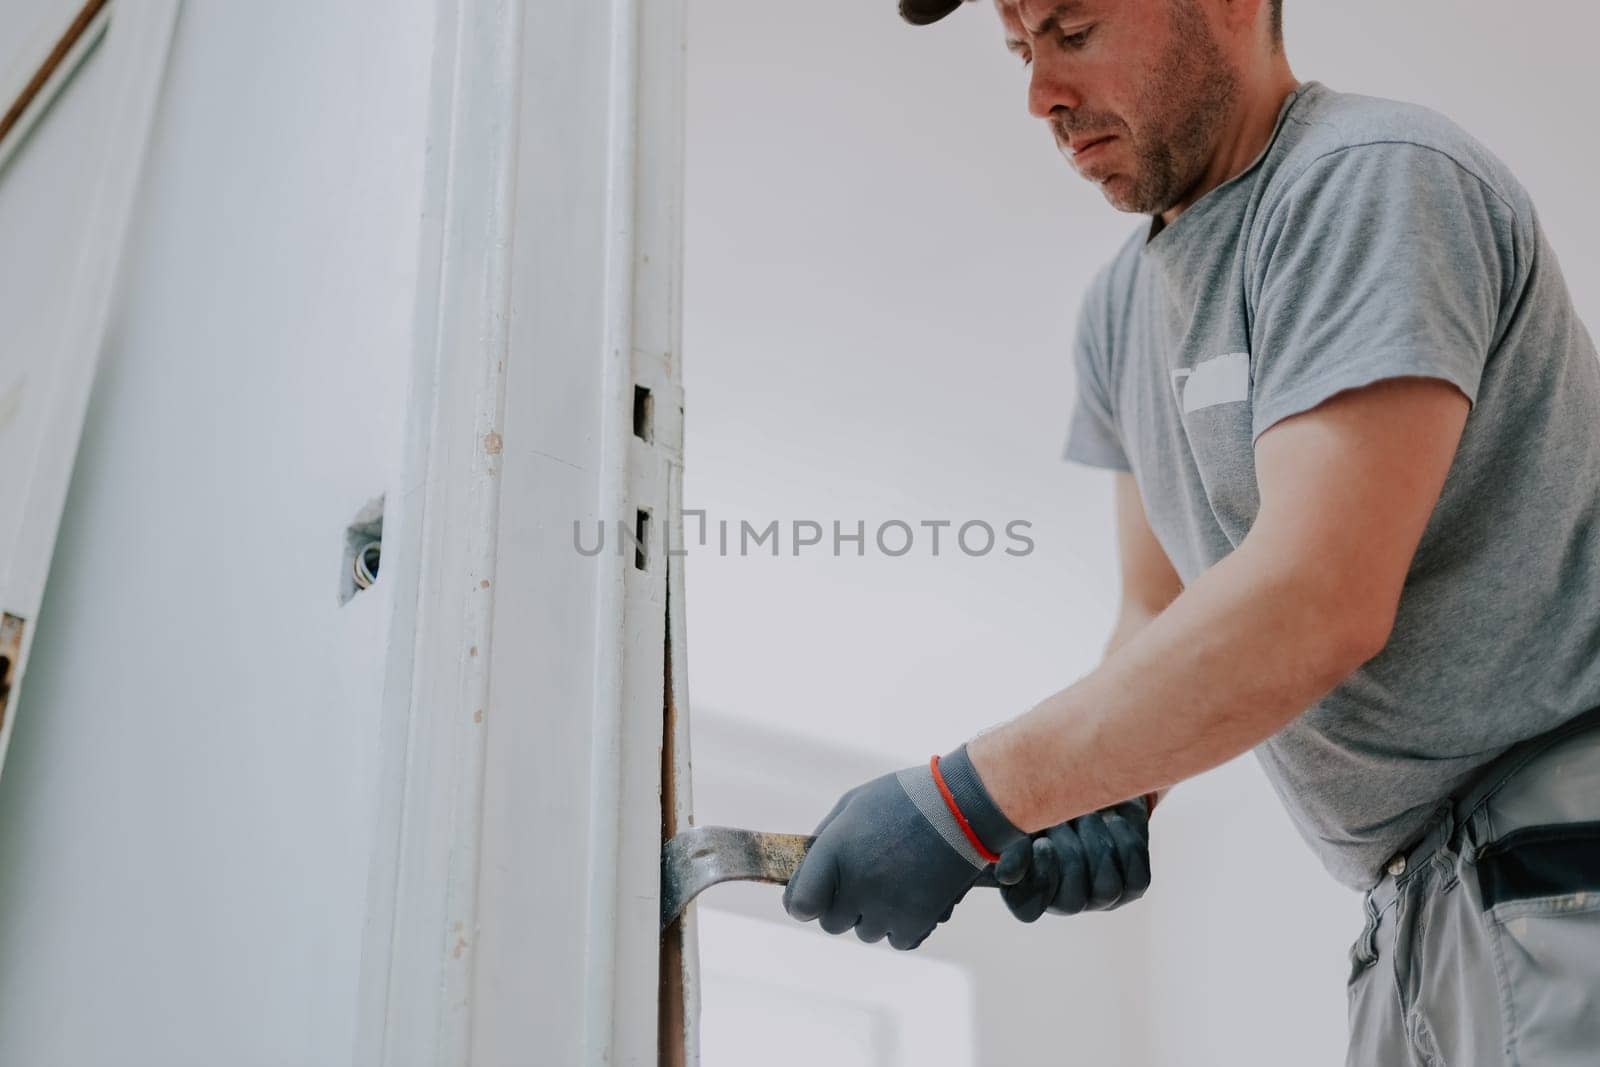 Young caucasian man in uniform and gray textile gloves using a crowbar removes old wooden plinths from a doorway, bottom view close-up with selective focus.Construction work concept.